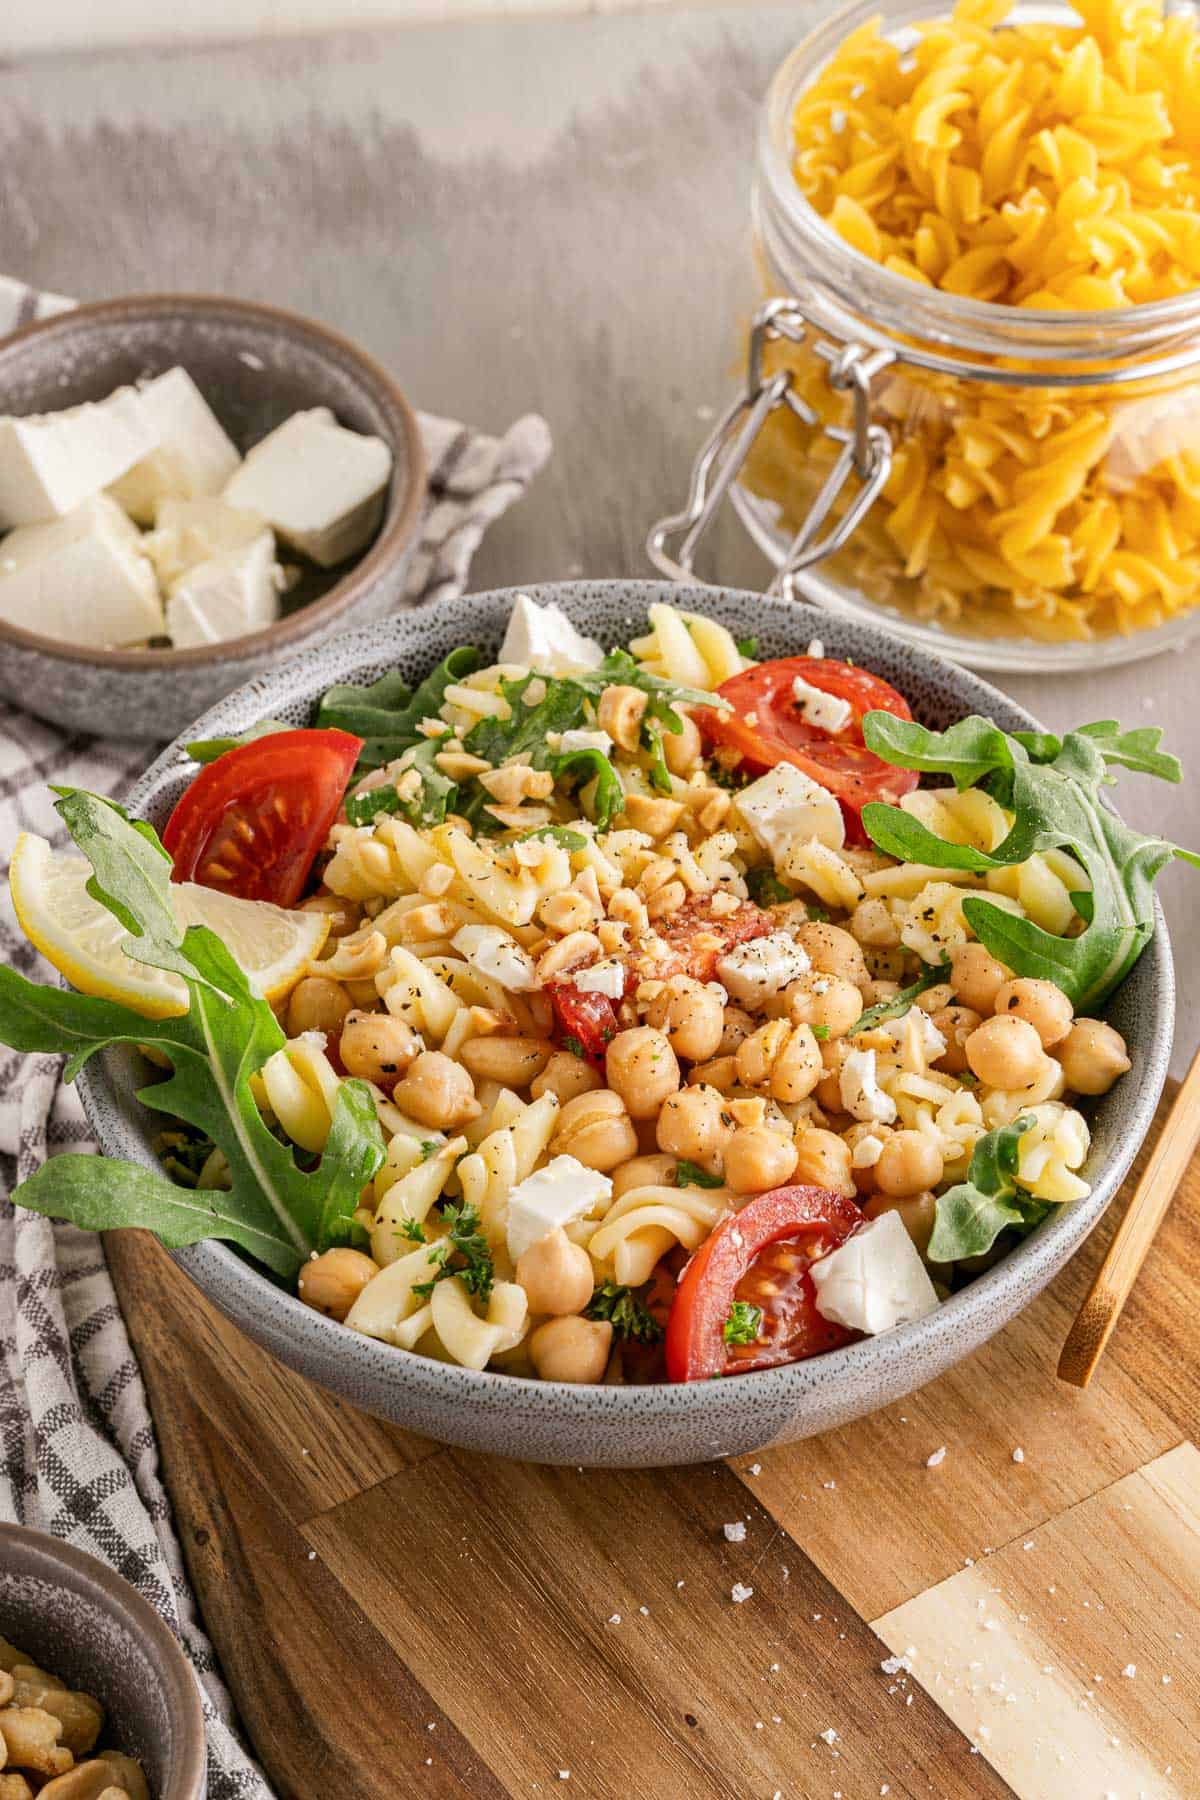 A bowl of chickpea pasta salad with tomatoes, arugula, pasta, and cheese on a wooden table, alongside ingredients.